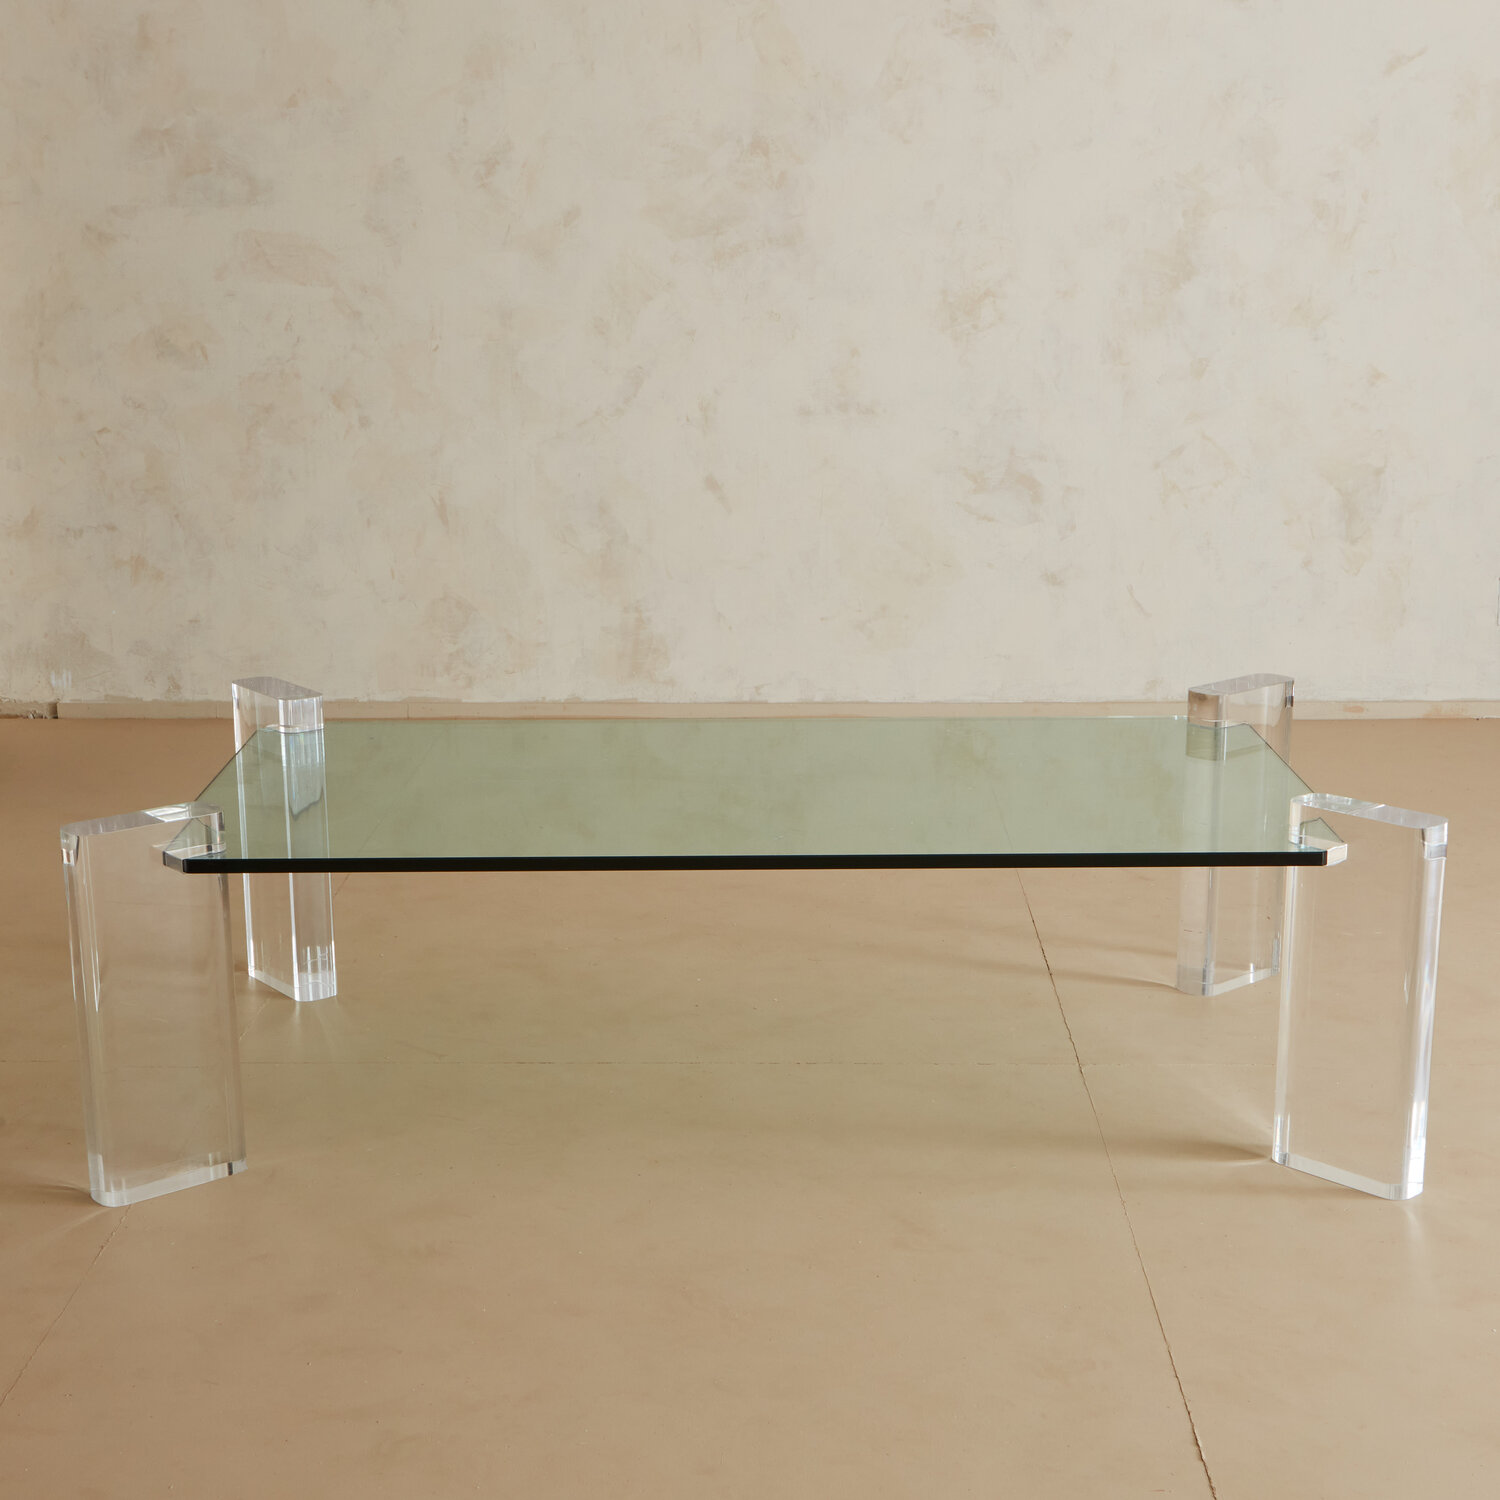 Lucite Coffee Table With Four Legs, Long Lucite Coffee Table